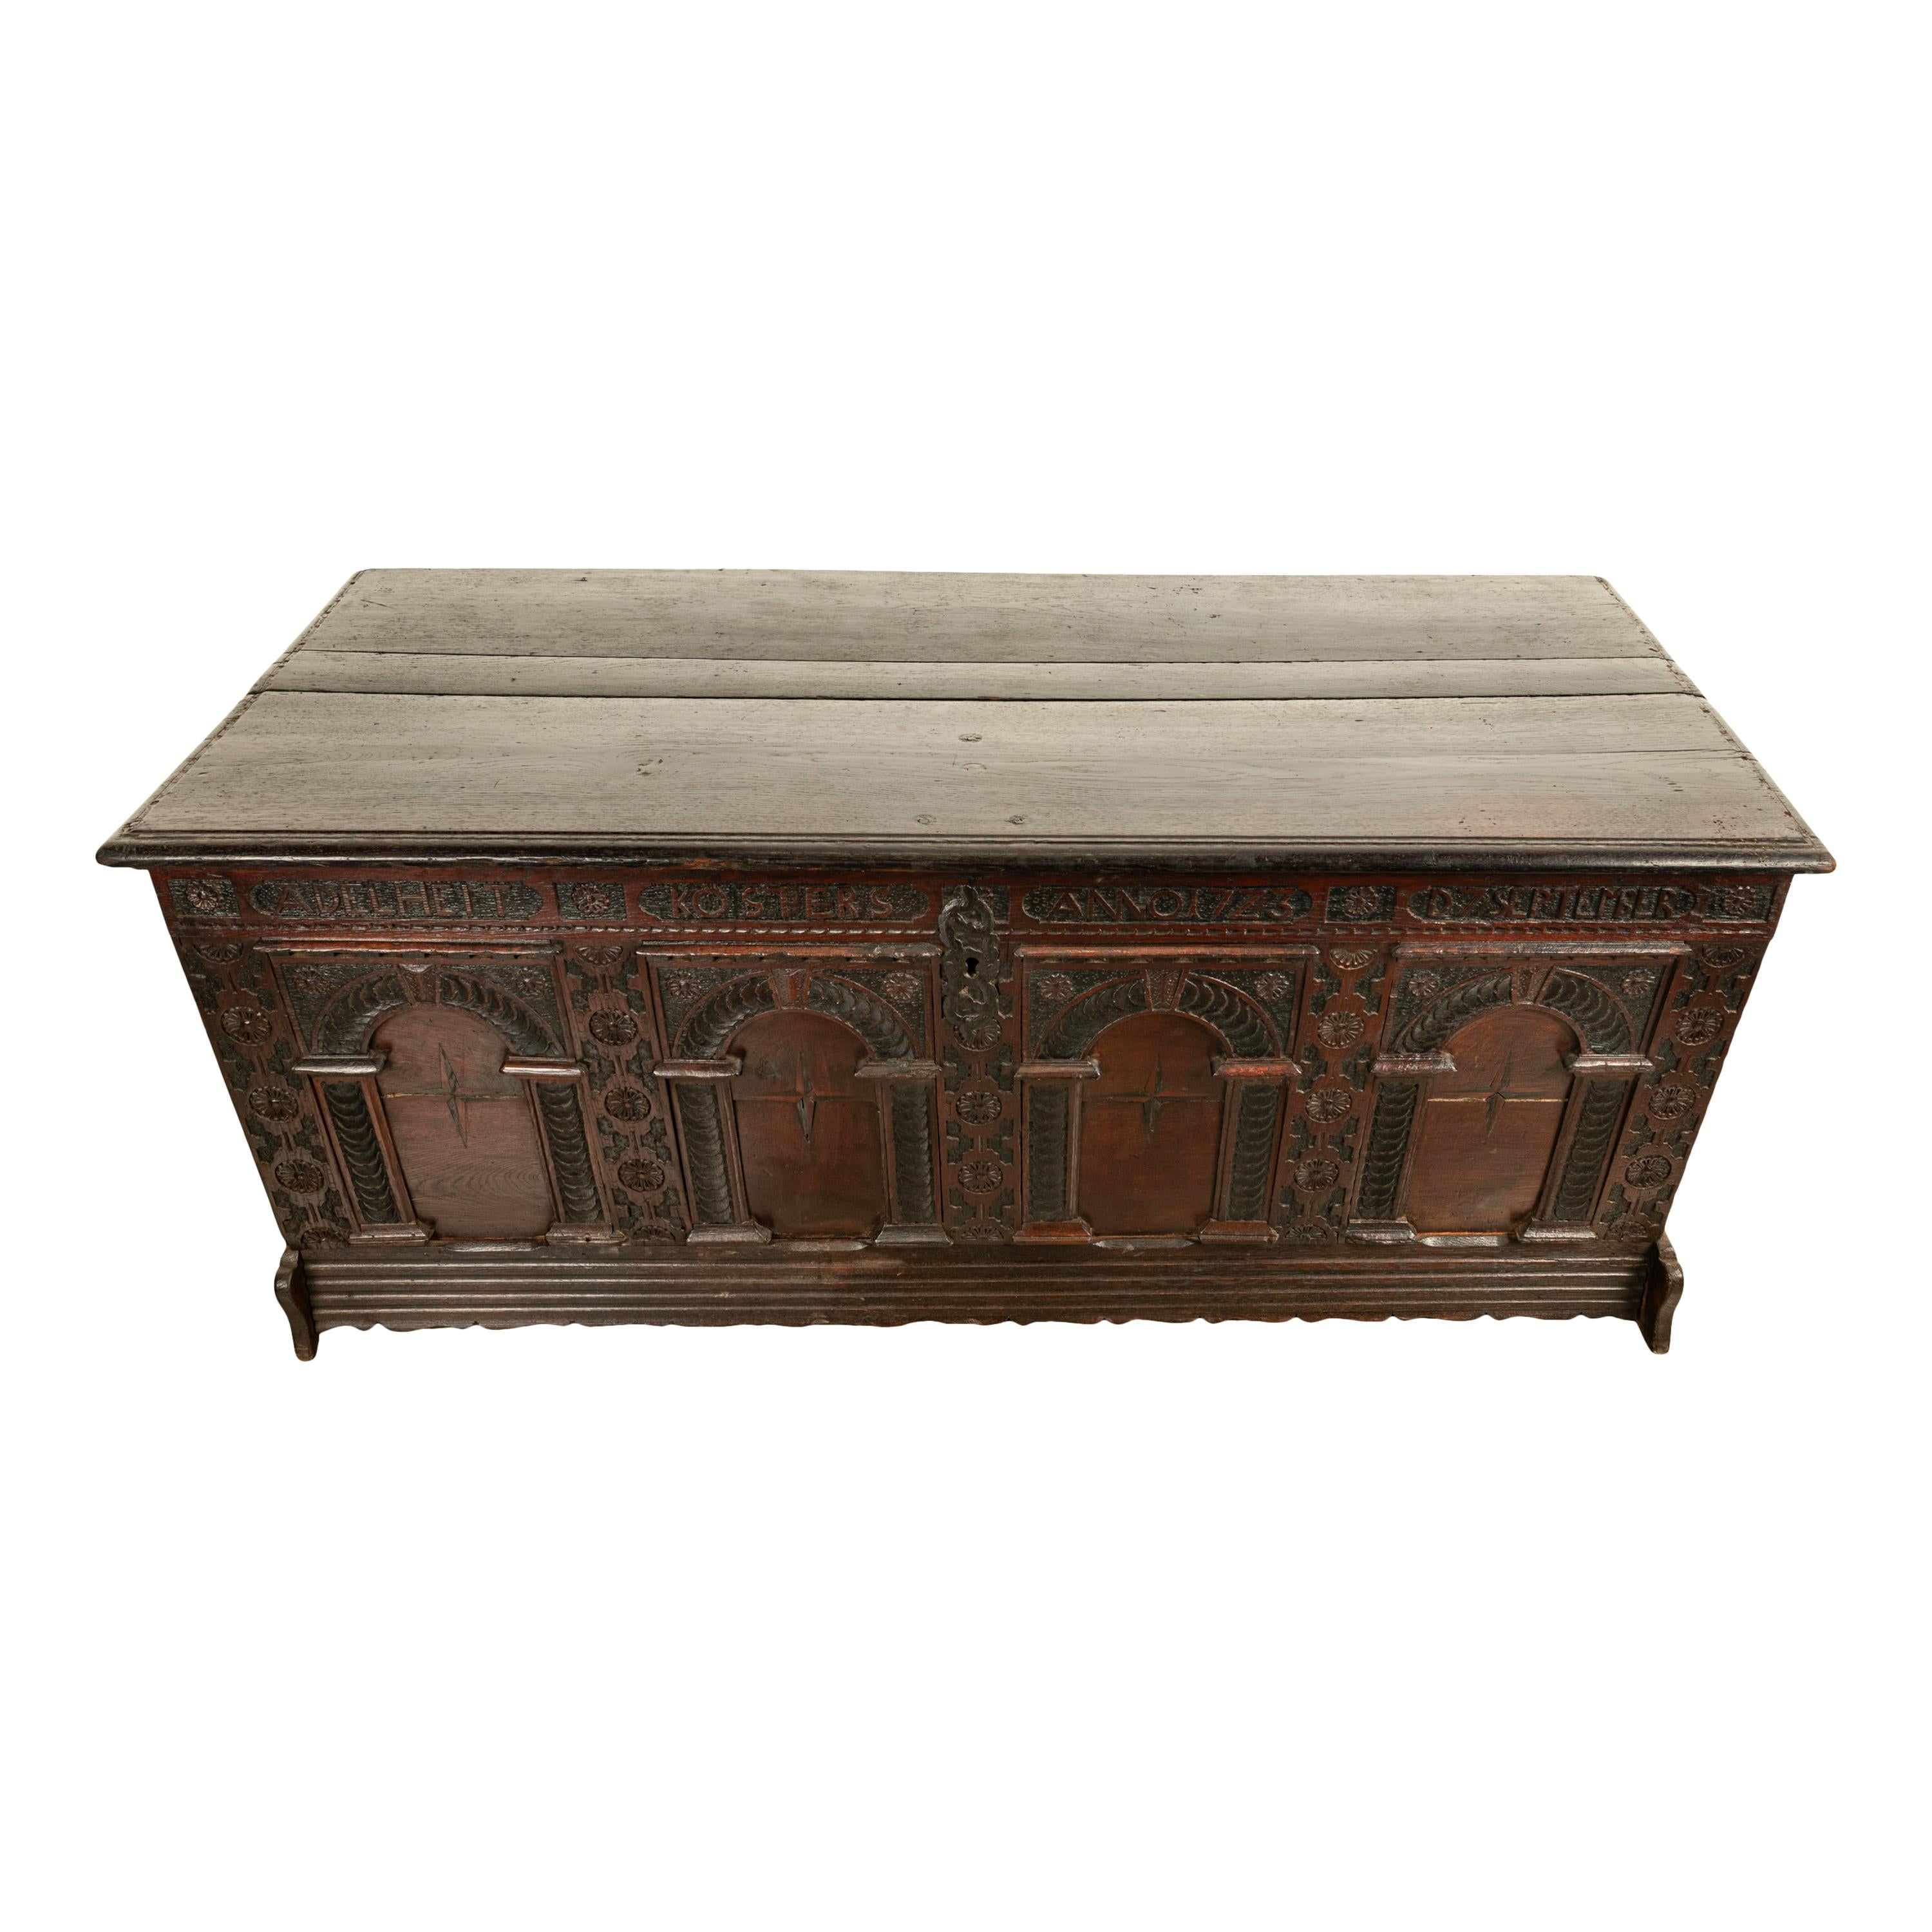 Early 18th Century Antique Monumental German Carved Oak Baroque Marquetry Dowry Chest Coffer 1723 For Sale